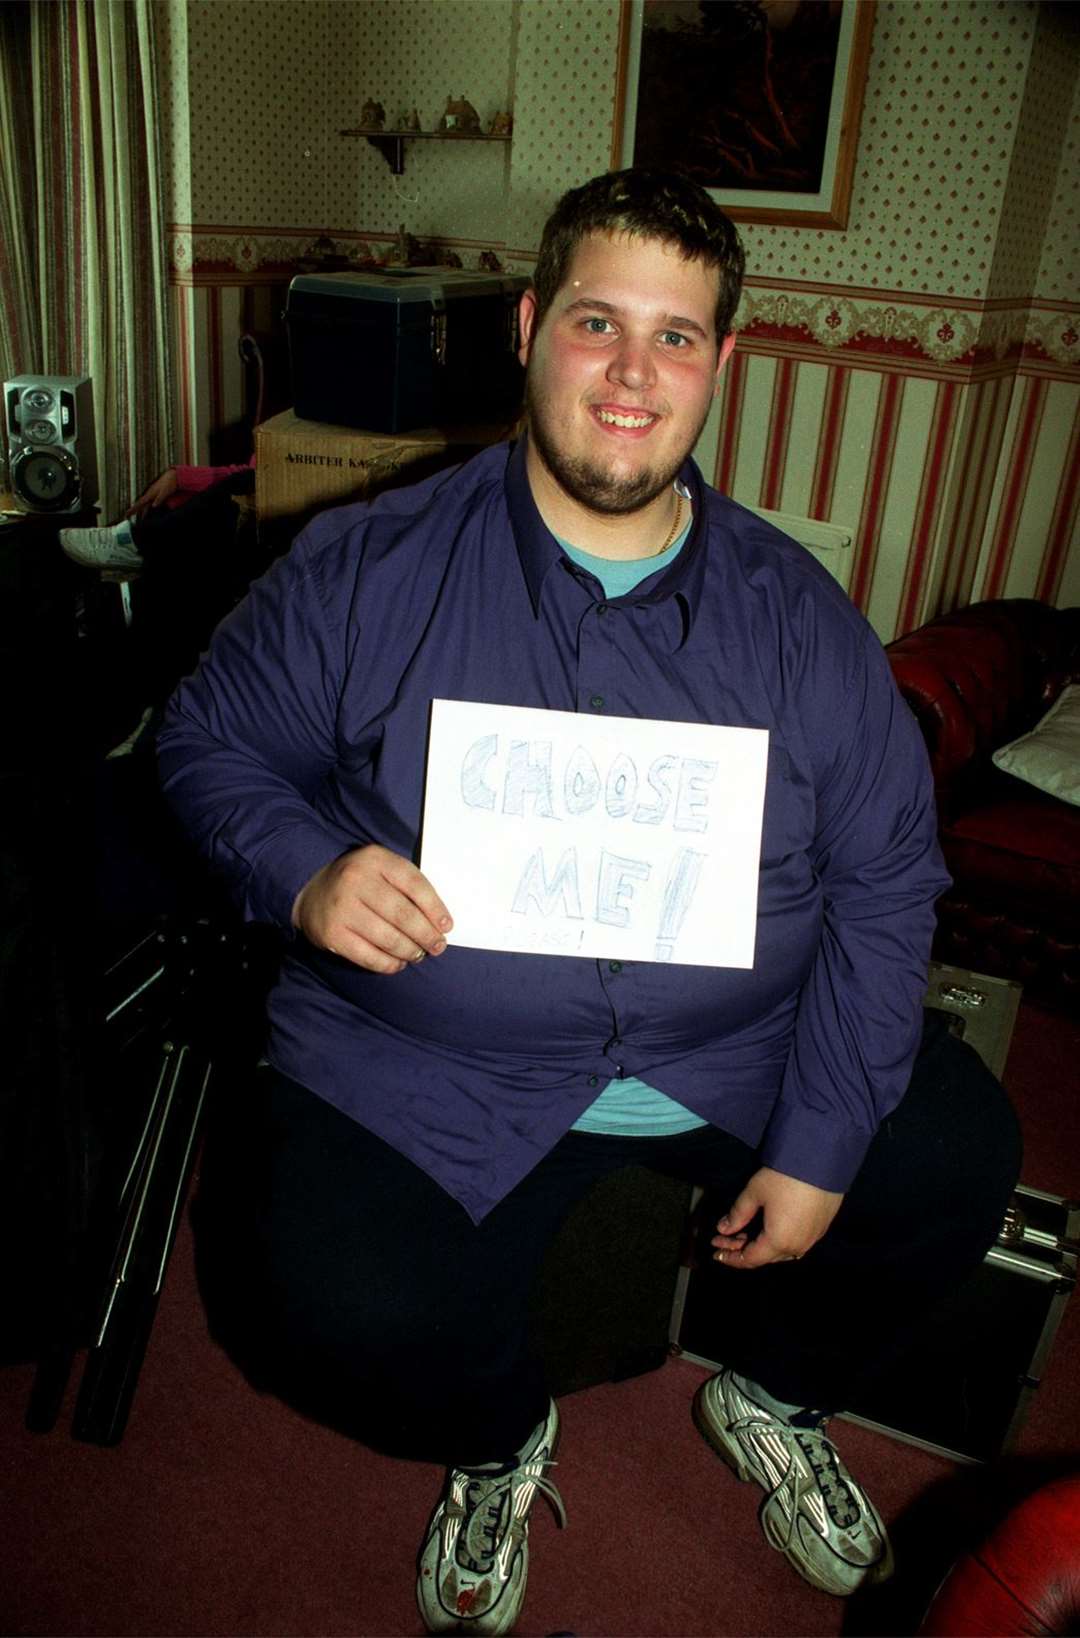 Pictured in 2001, Rik Waller asking for people's votes